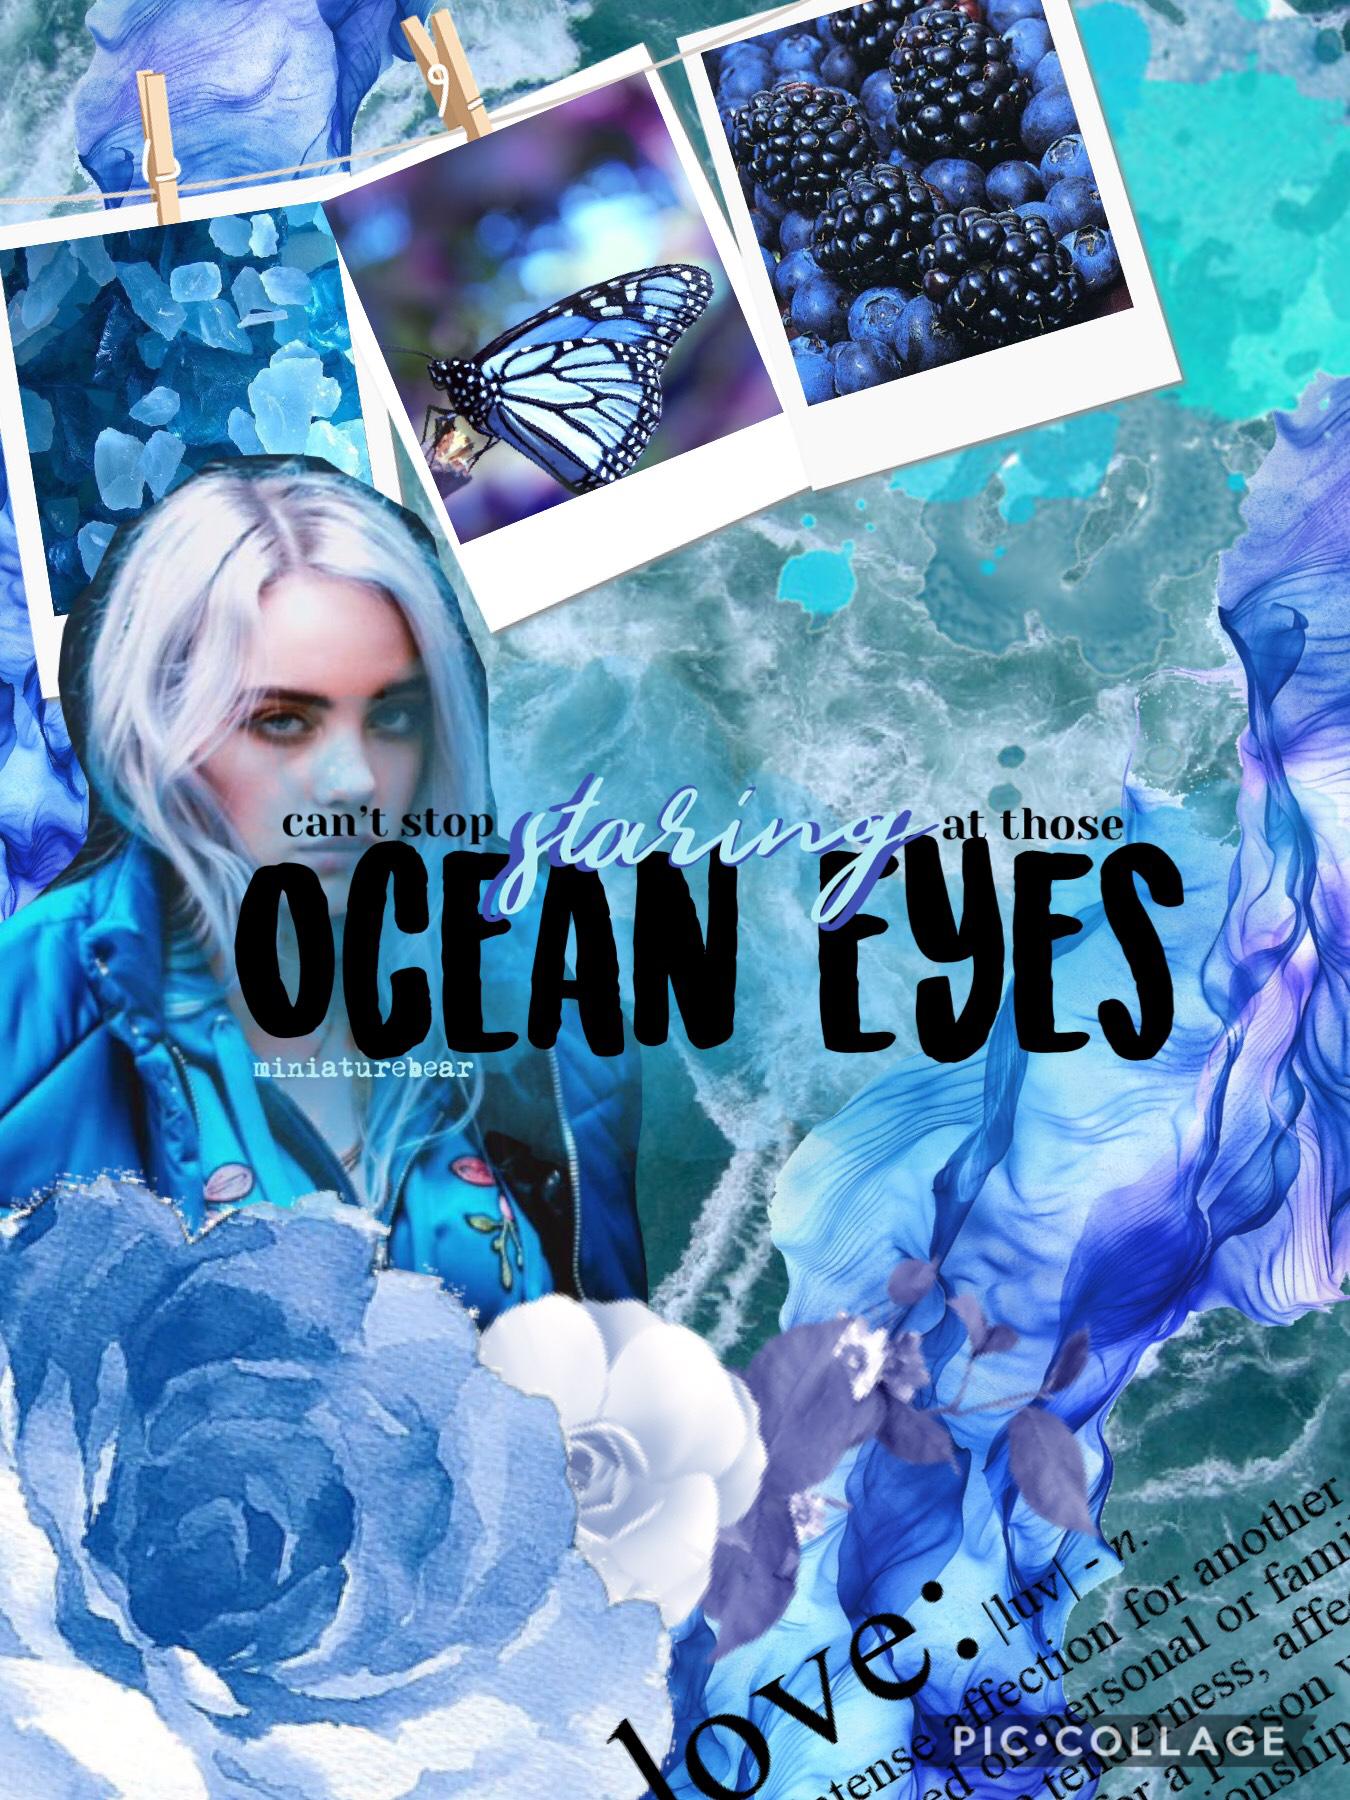 From “Ocean Eyes” by Billie Eilish. Hey guys! I know its been a while since I’ve posted. School has been stressful lately. But I’m trying this new style of collages. Lmk what you think about it! 